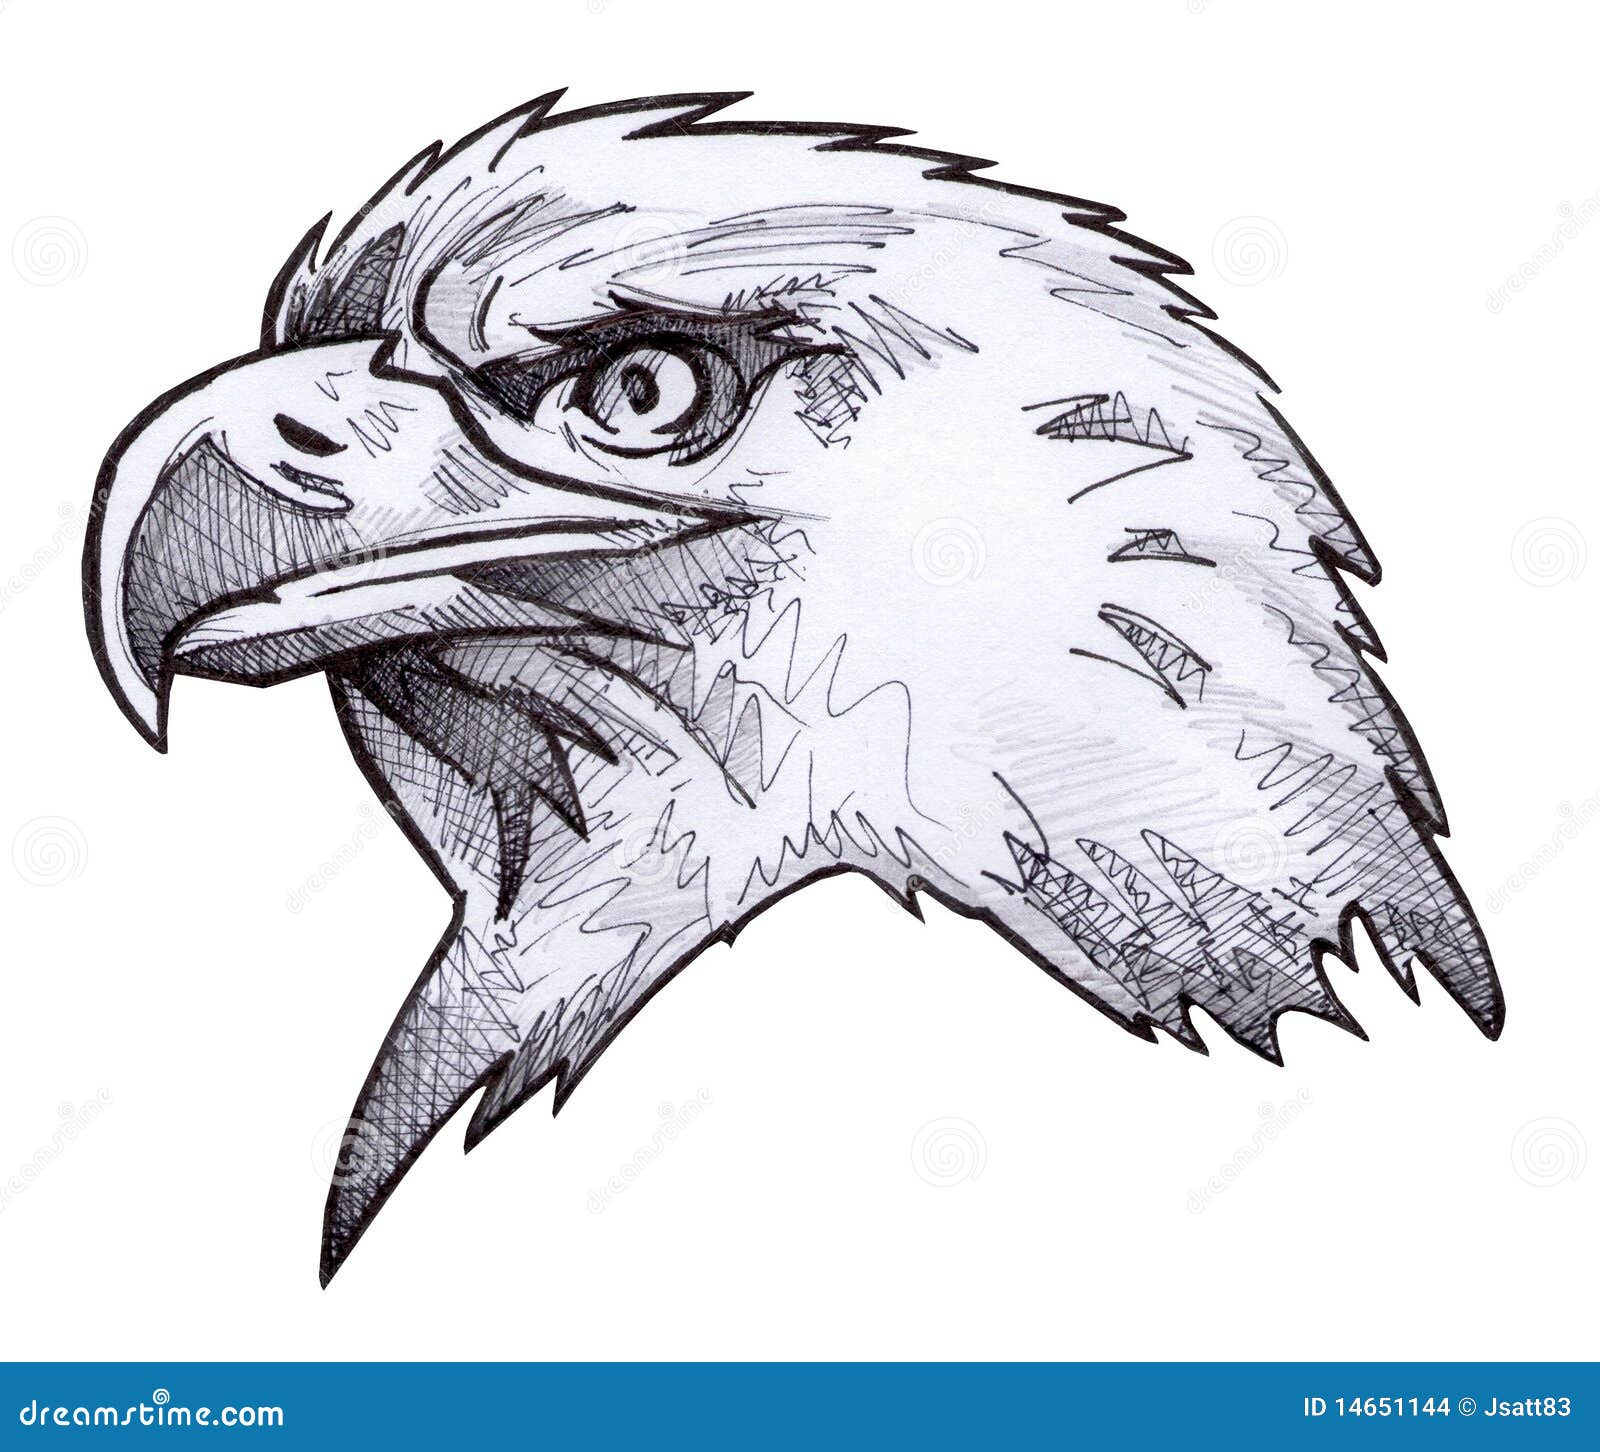 Eagle drawing, Eagle painting, Wood carving patterns